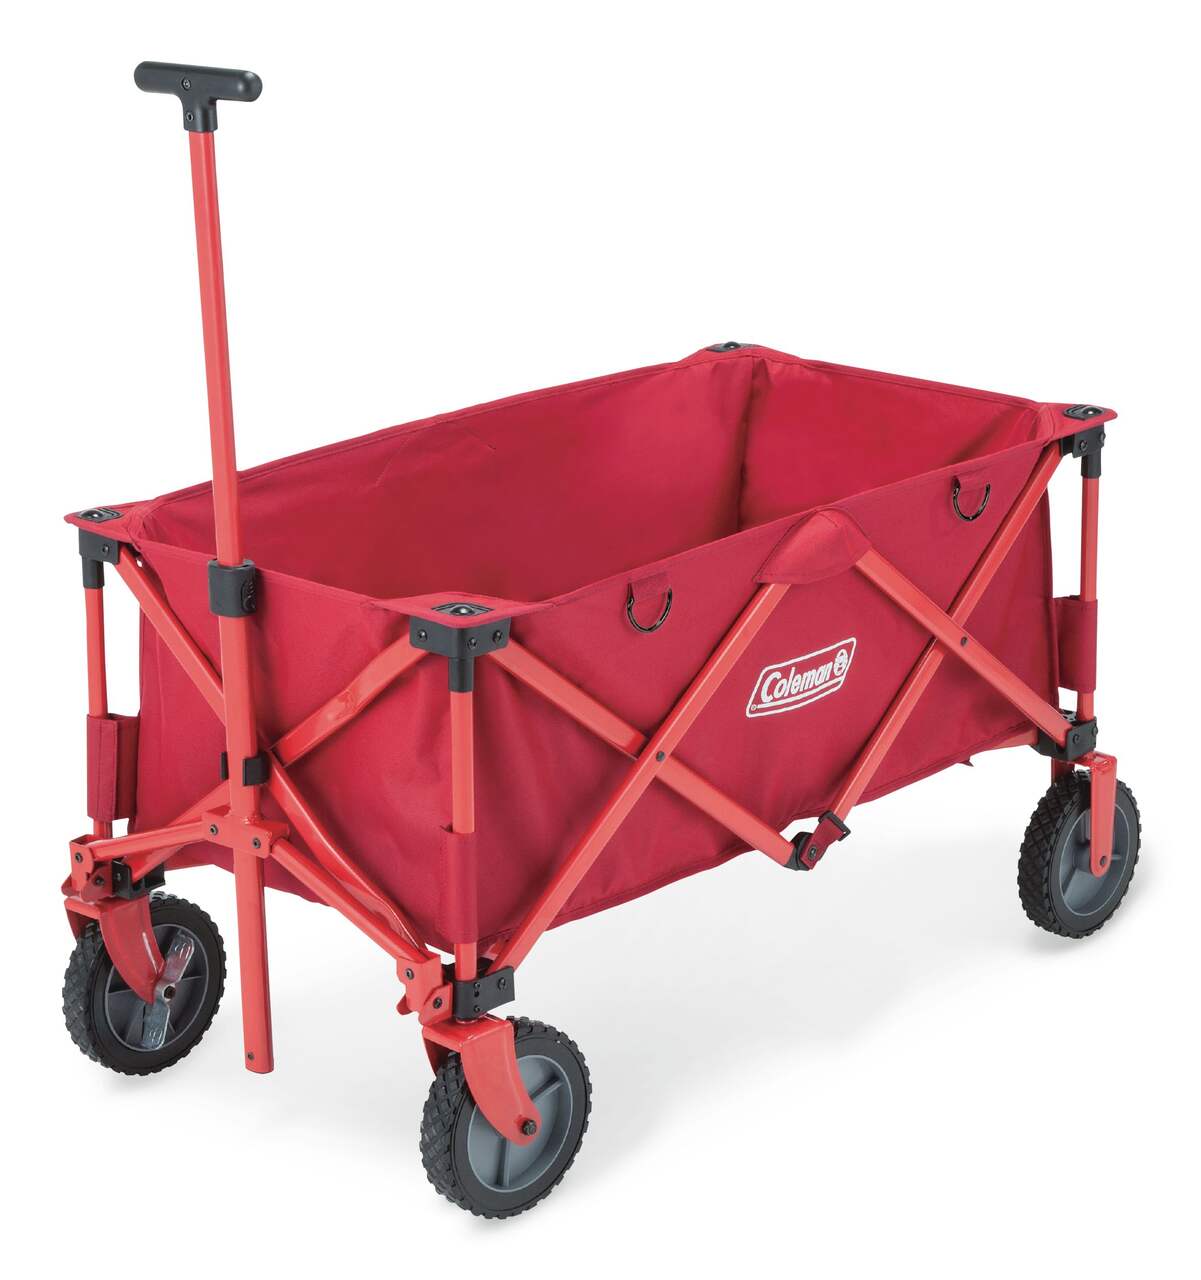 https://media-www.canadiantire.ca/product/playing/camping/camping-furniture/0766151/coleman-4-in-1-wagon-e34b1c96-d477-4968-8a0d-3f8433ec411f-jpgrendition.jpg?imdensity=1&imwidth=640&impolicy=mZoom